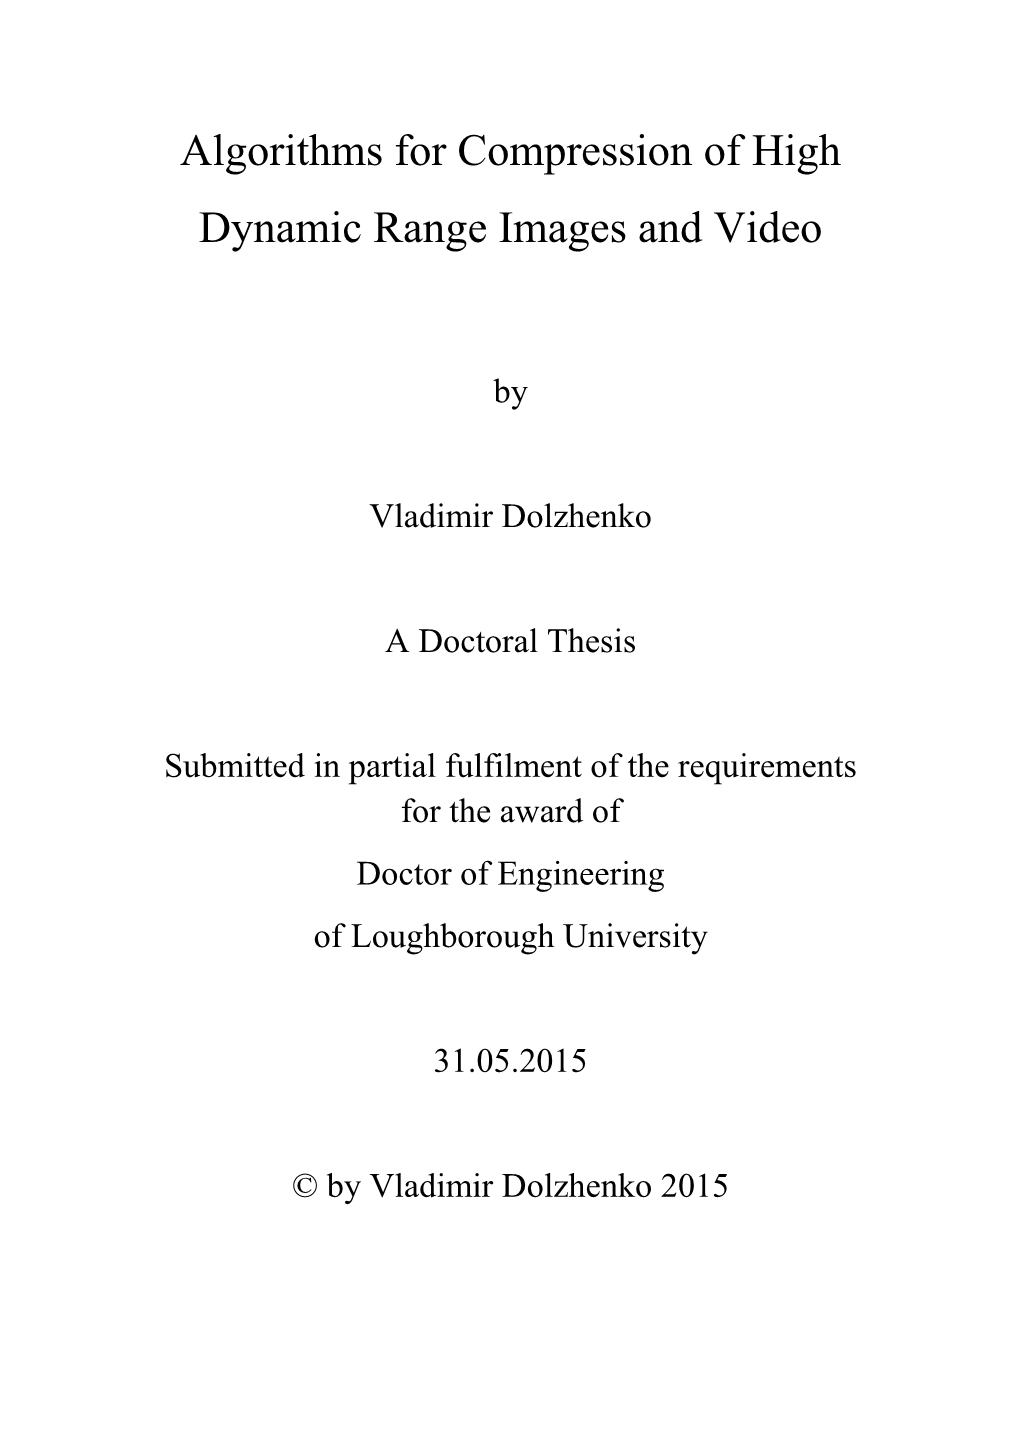 Algorithms for Compression of High Dynamic Range Images and Video